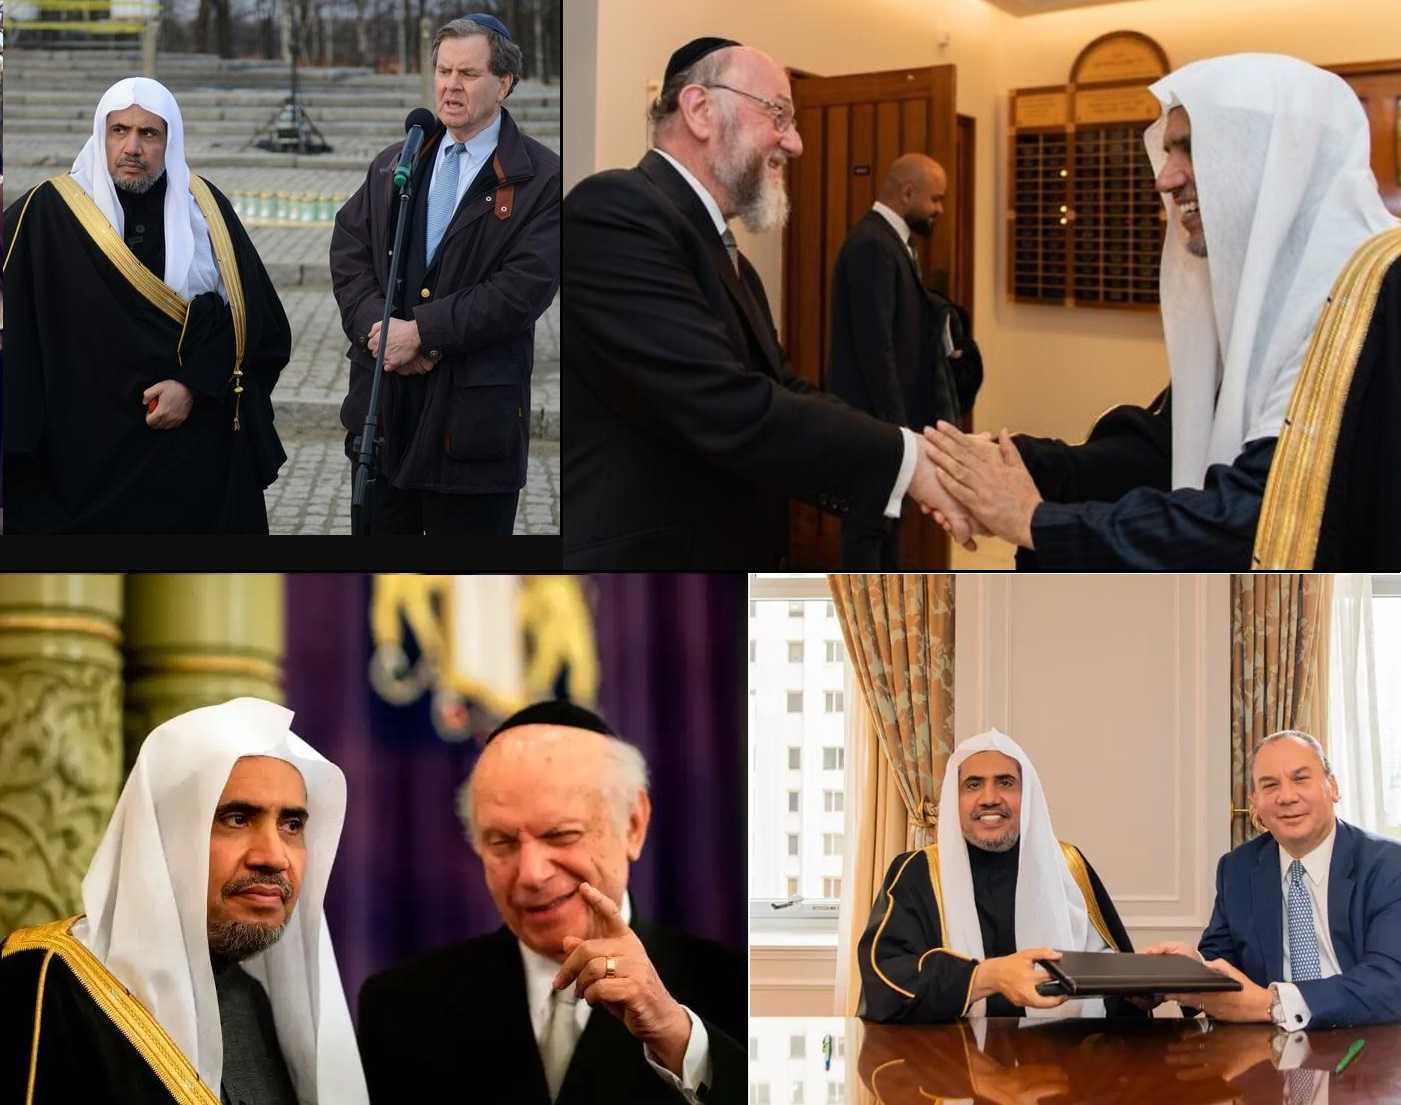 Mohammad Abdulkarim Al-Issa with various Zionist personalities, clockwise from top left: American Jewish Committee chief David Harris; UK-based Rabbi Ephraim Mirvis; and US-based rabbis Marc Schneier and Arthur Schneier, all of whom have defended Israel's current military assault on Gaza.